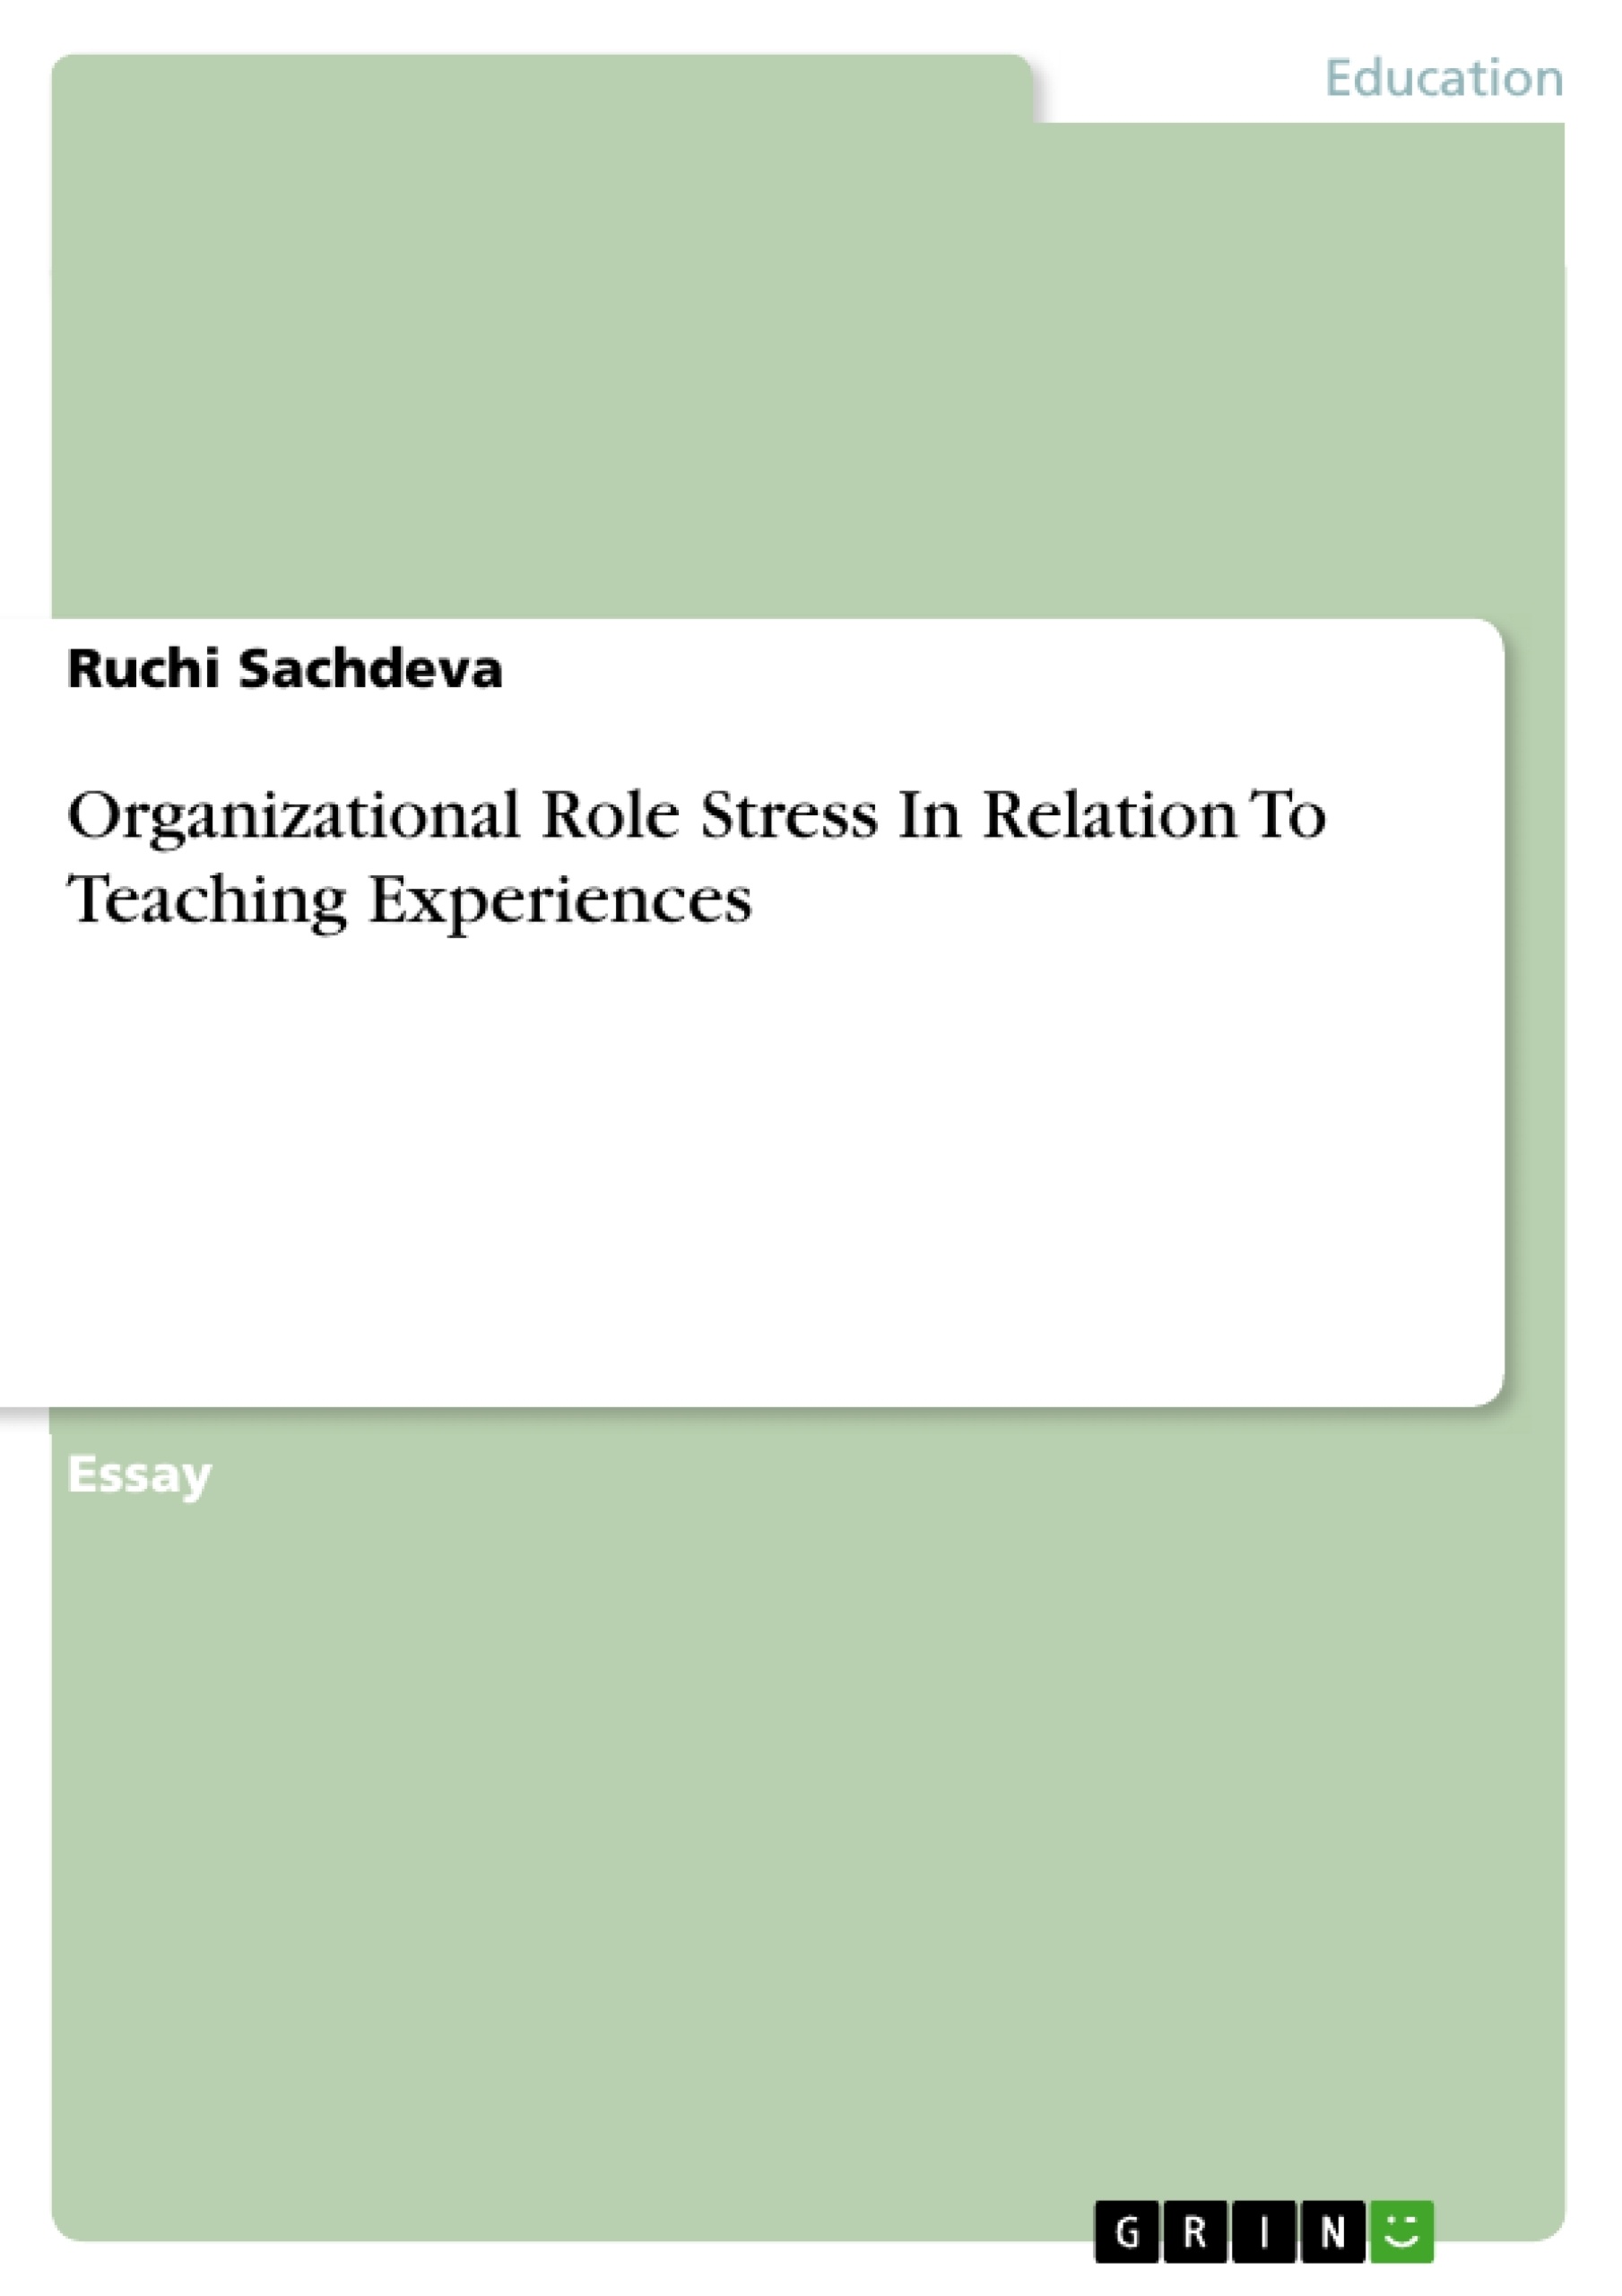 Title: Organizational Role Stress In Relation To Teaching Experiences